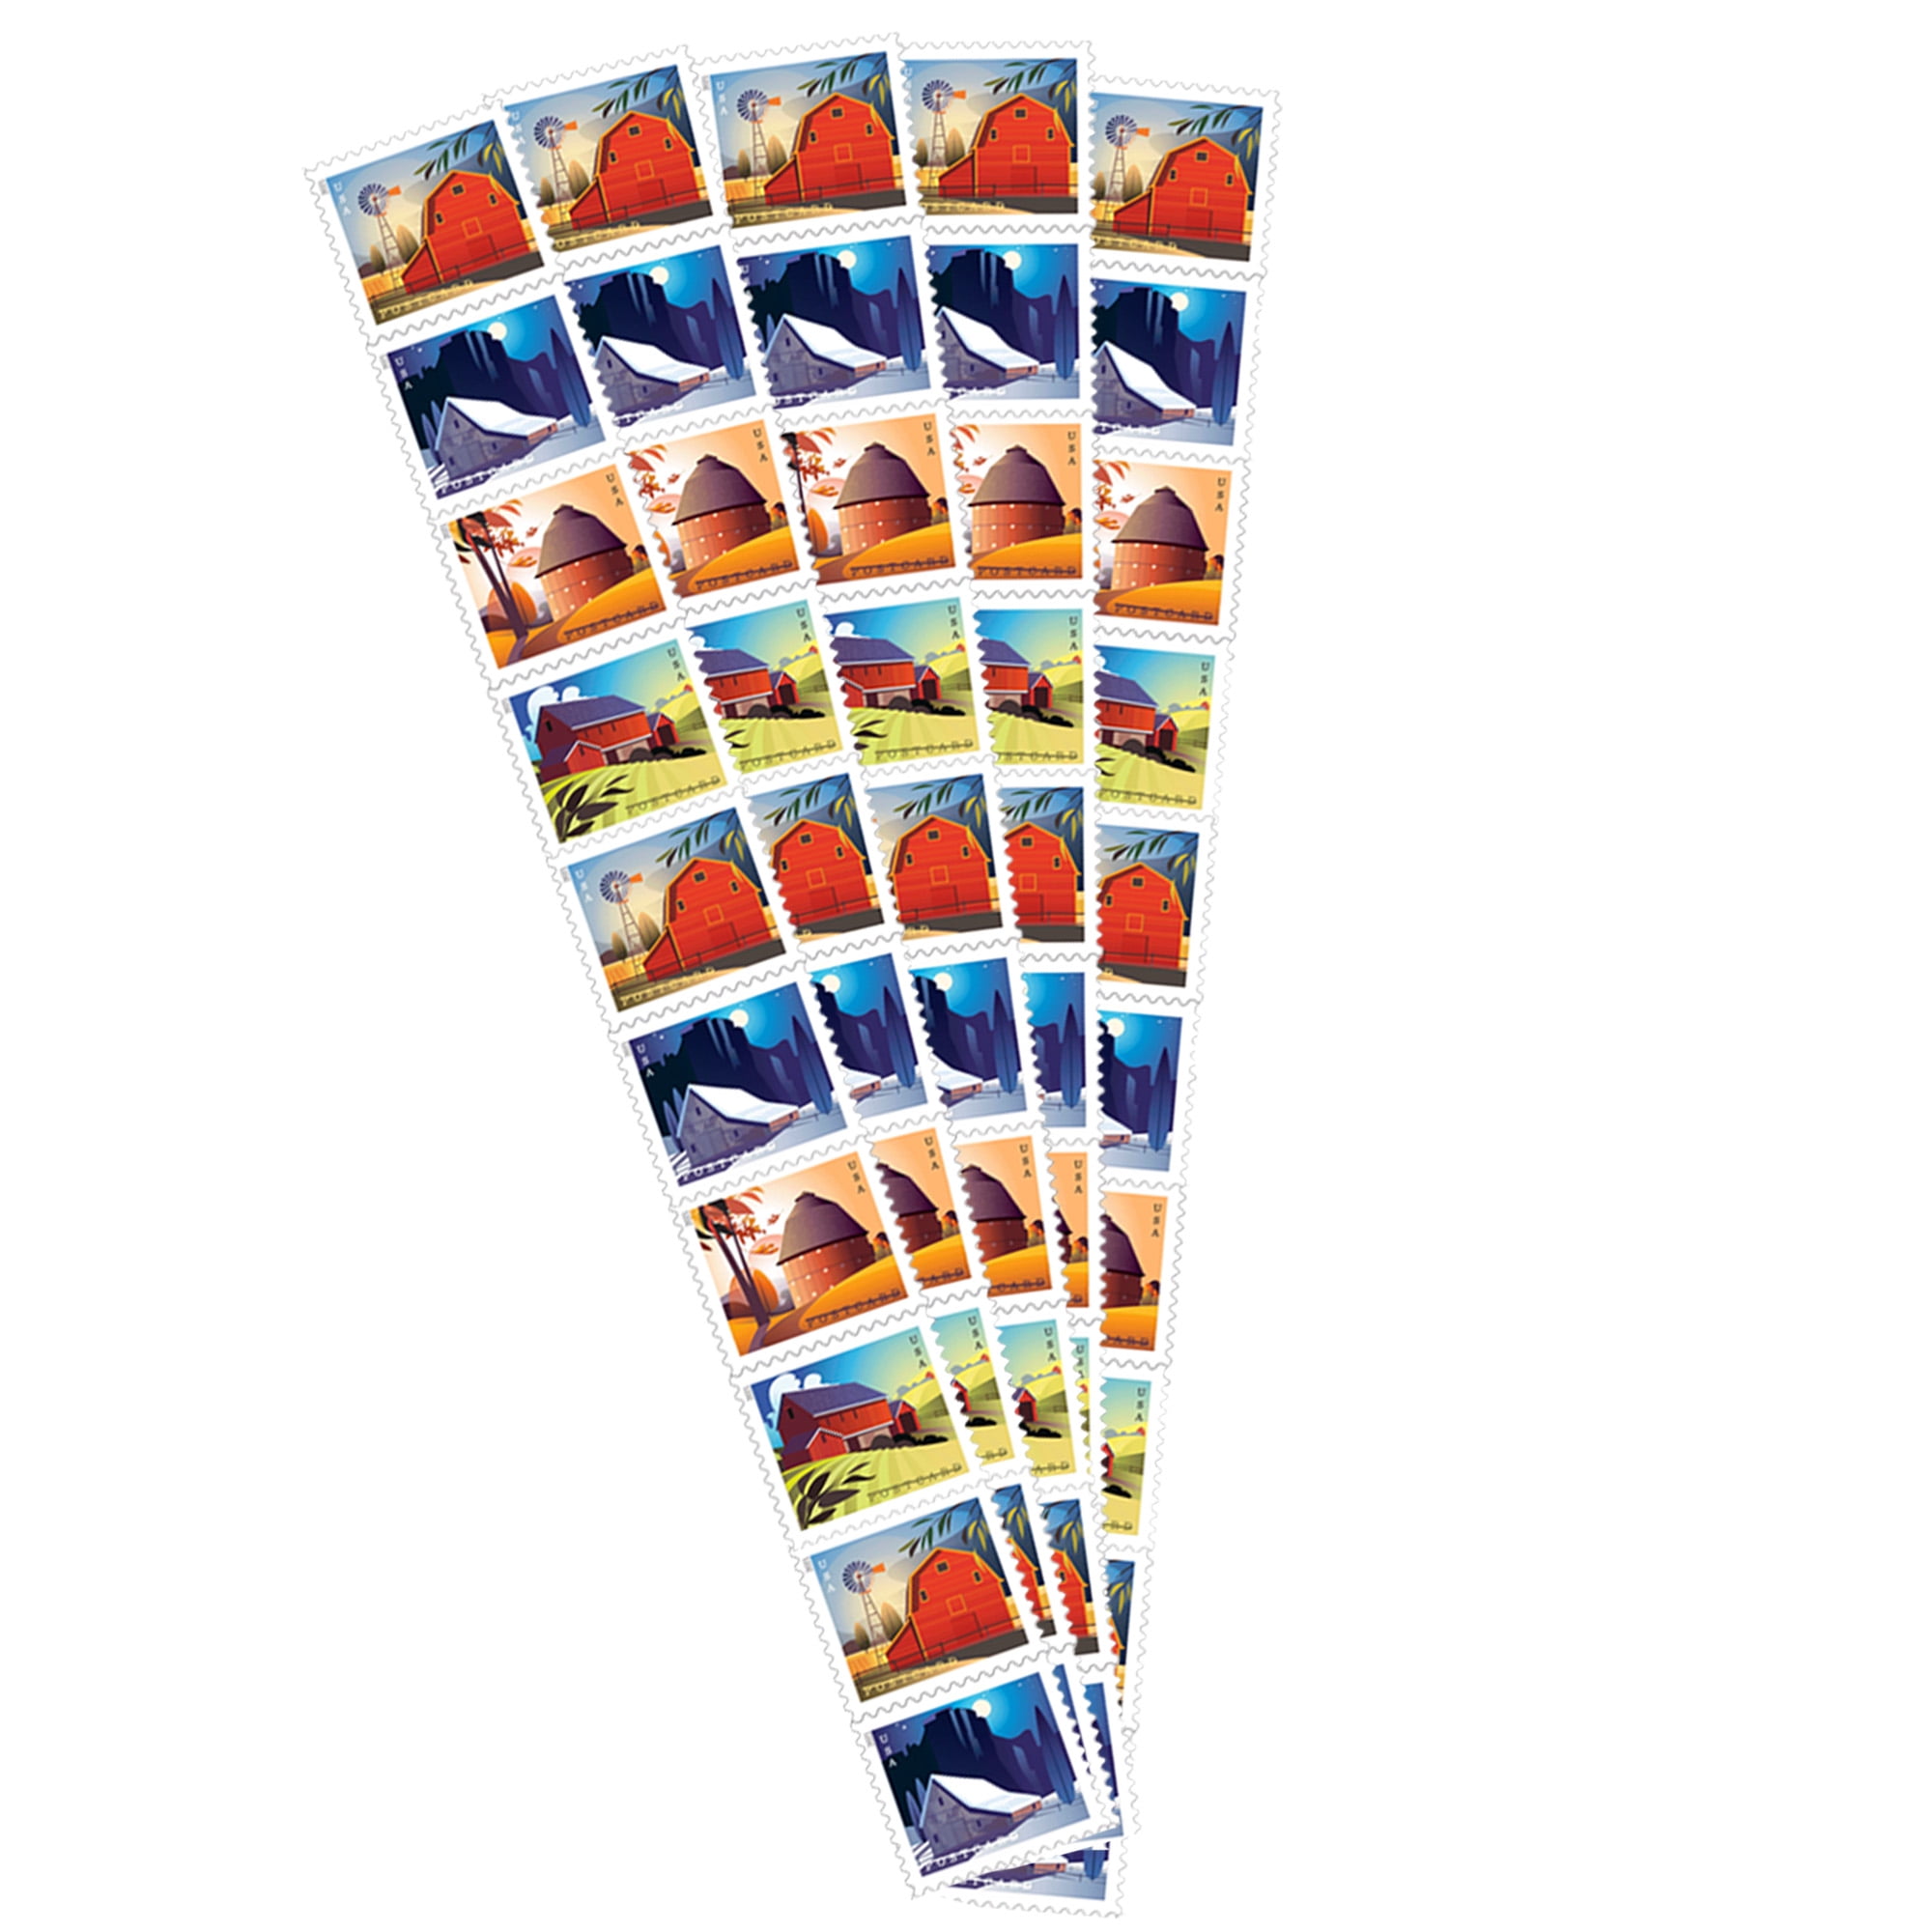 HOT* USPS Postage Stamps (100-Pack) only $44.99 shipped!